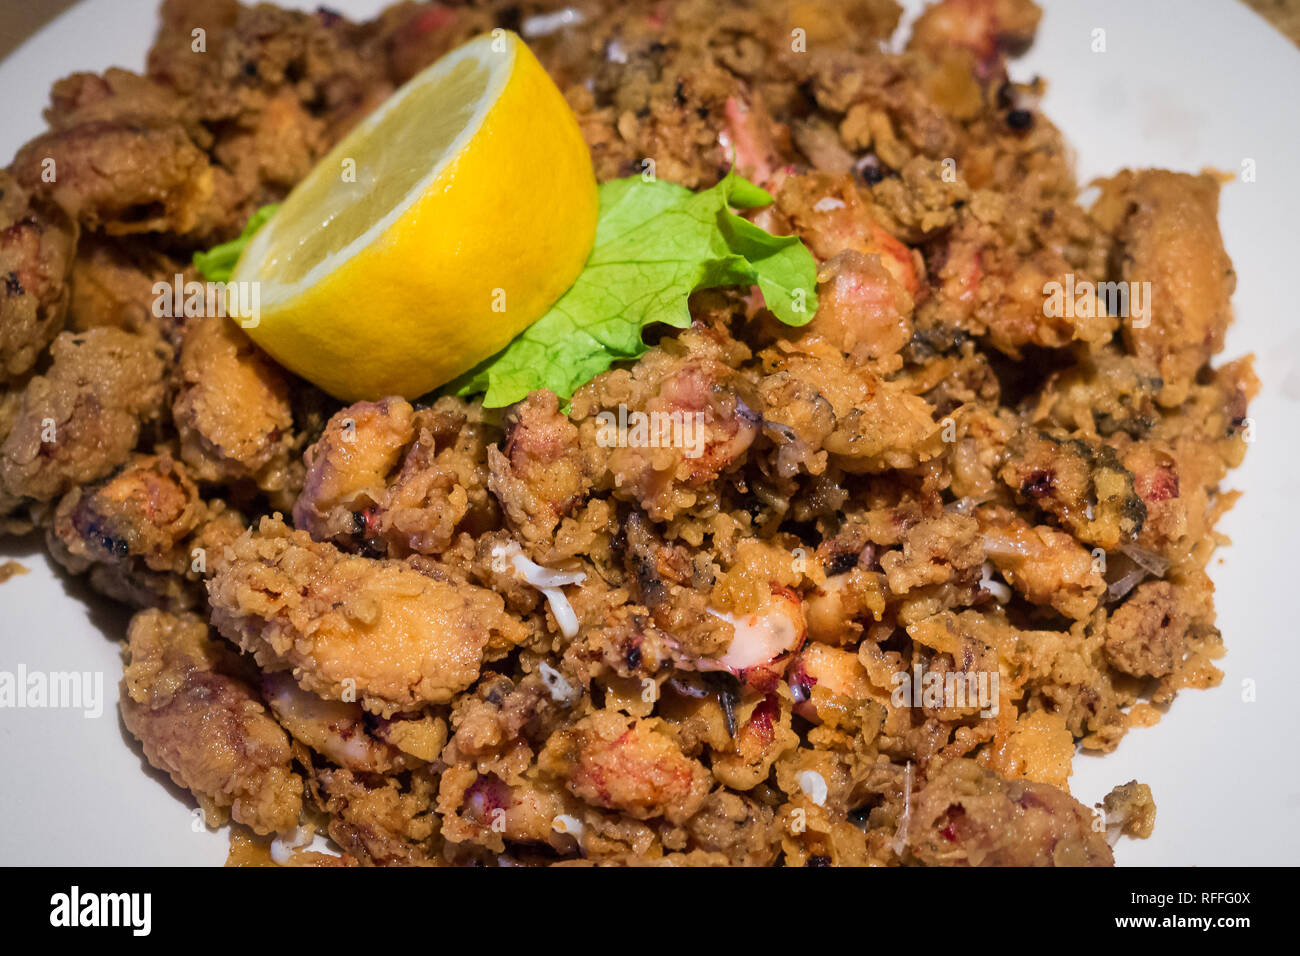 Plate of chopitos, plate of small calamari fried with lemon, traditional dish Stock Photo